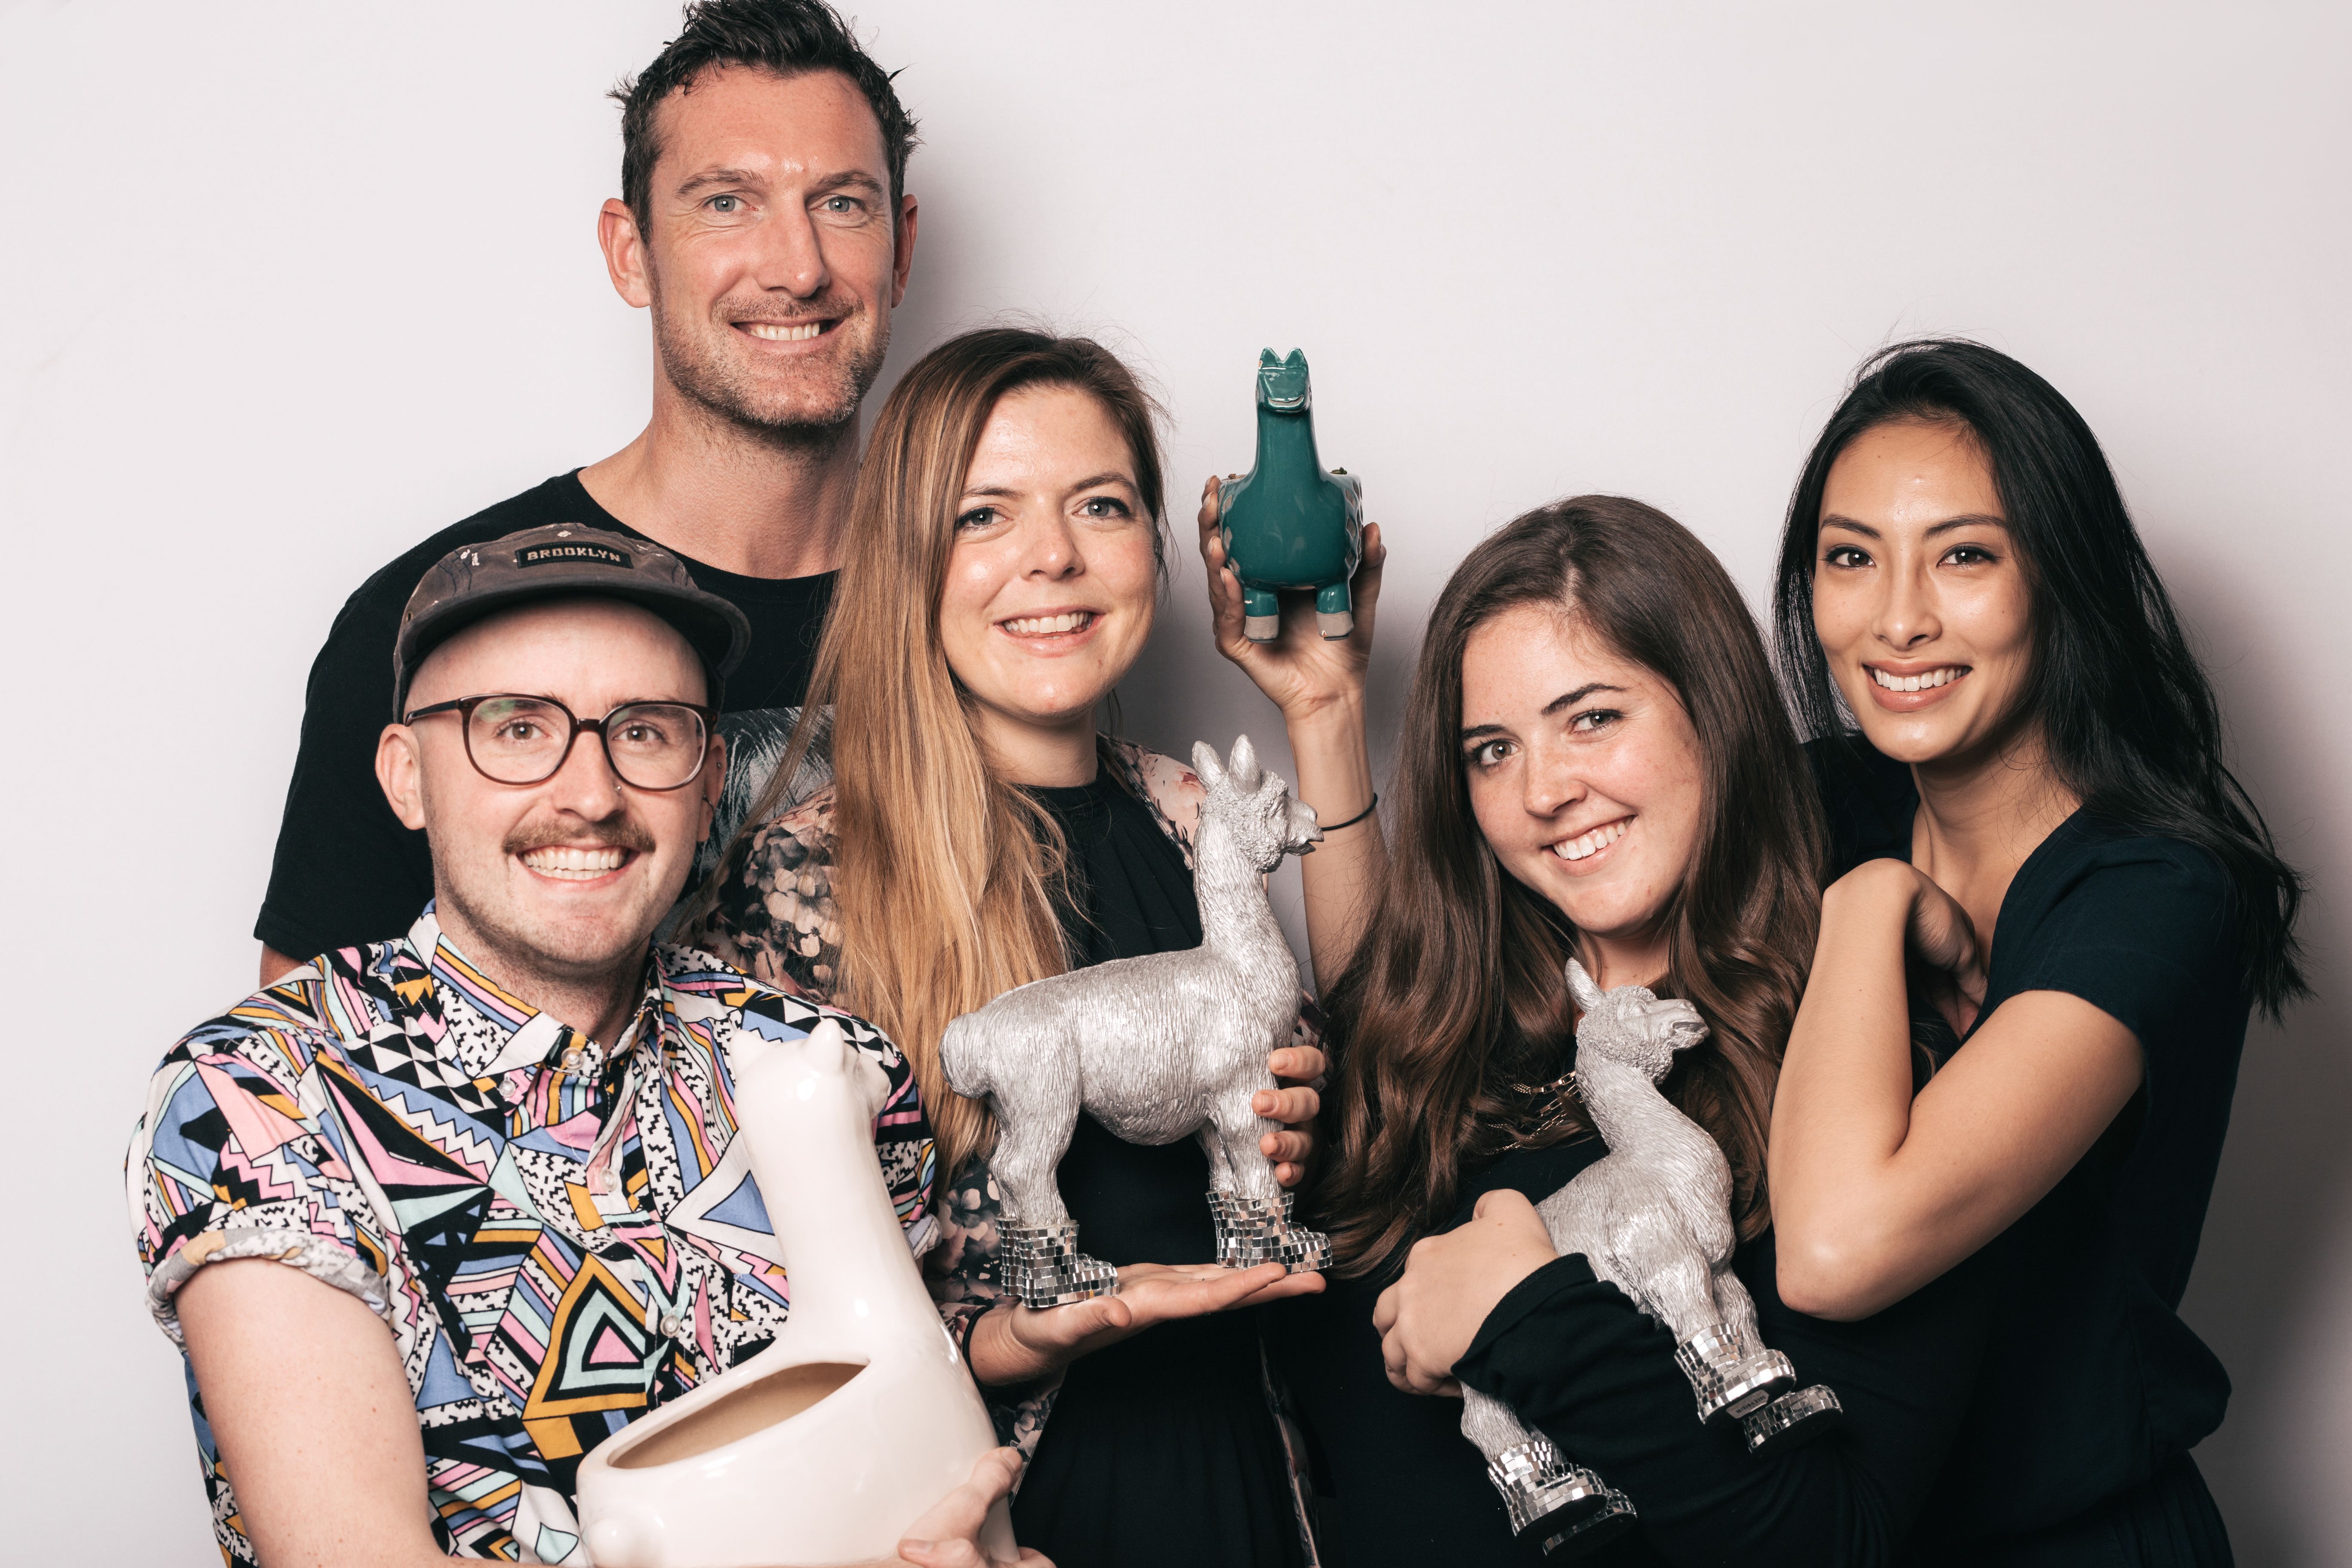 Group photo of five NextRoll employees holding llama statues.